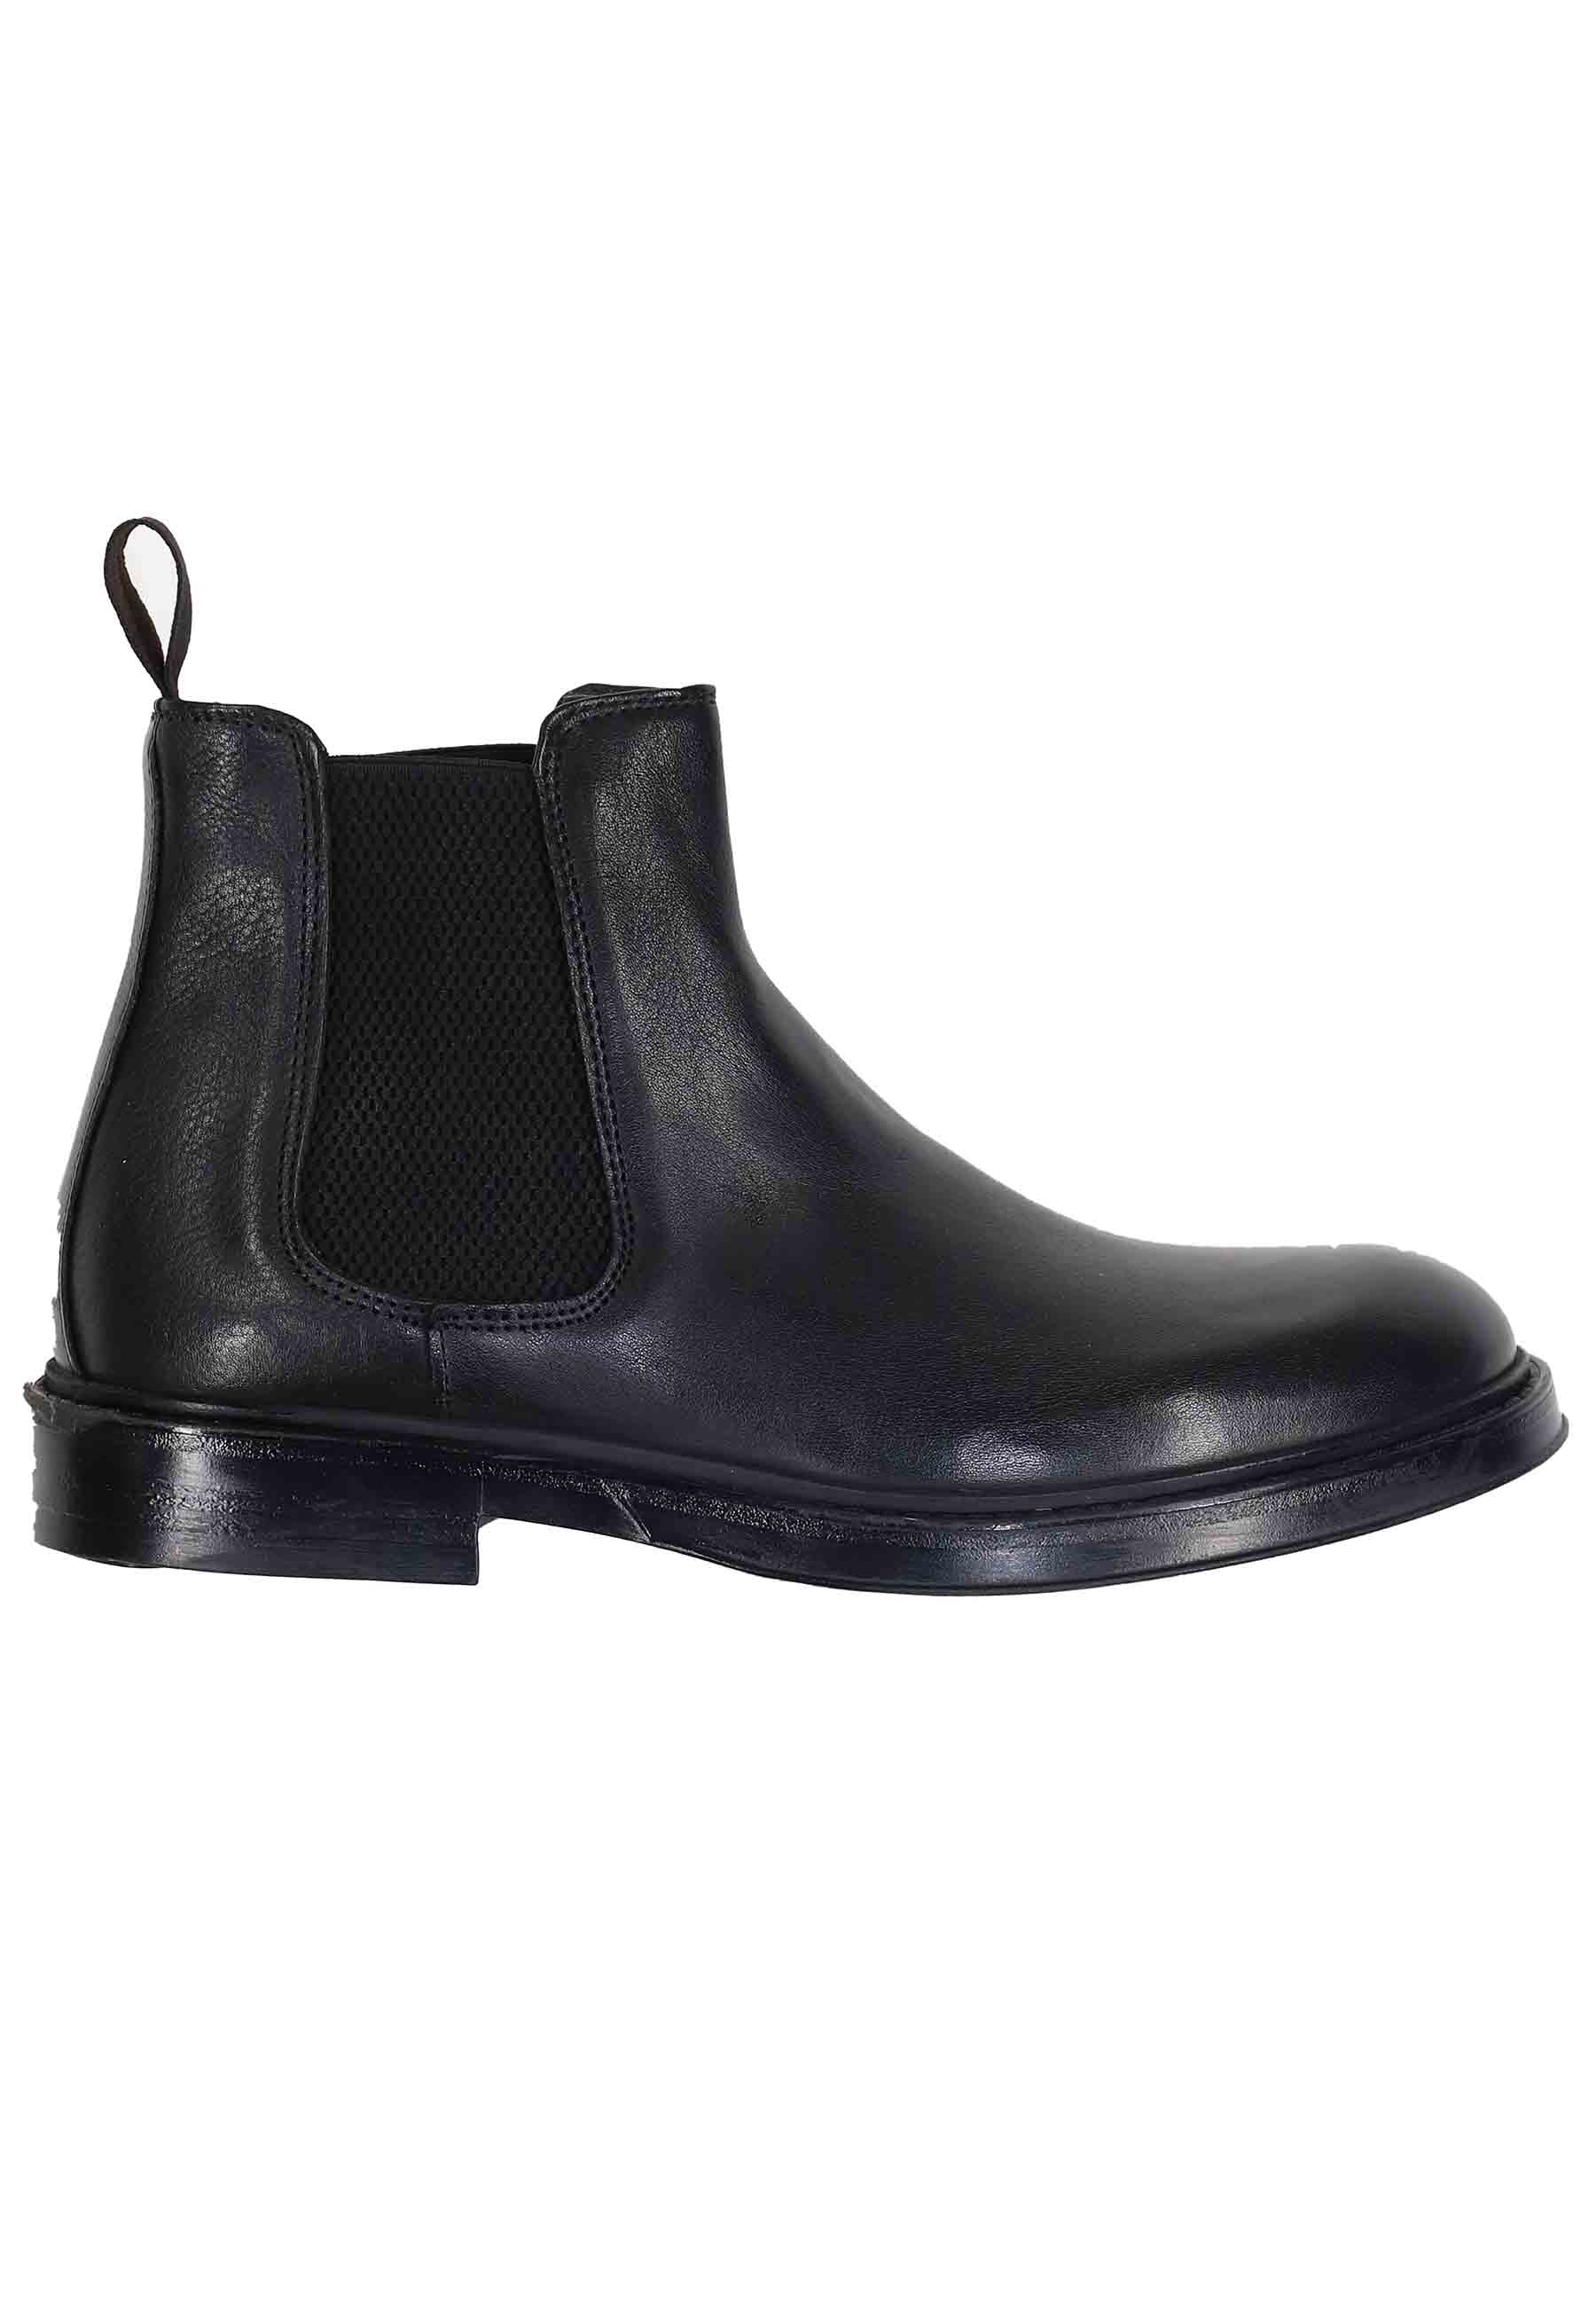 Bealtles ankle boots in black leather with round toe rubber sole